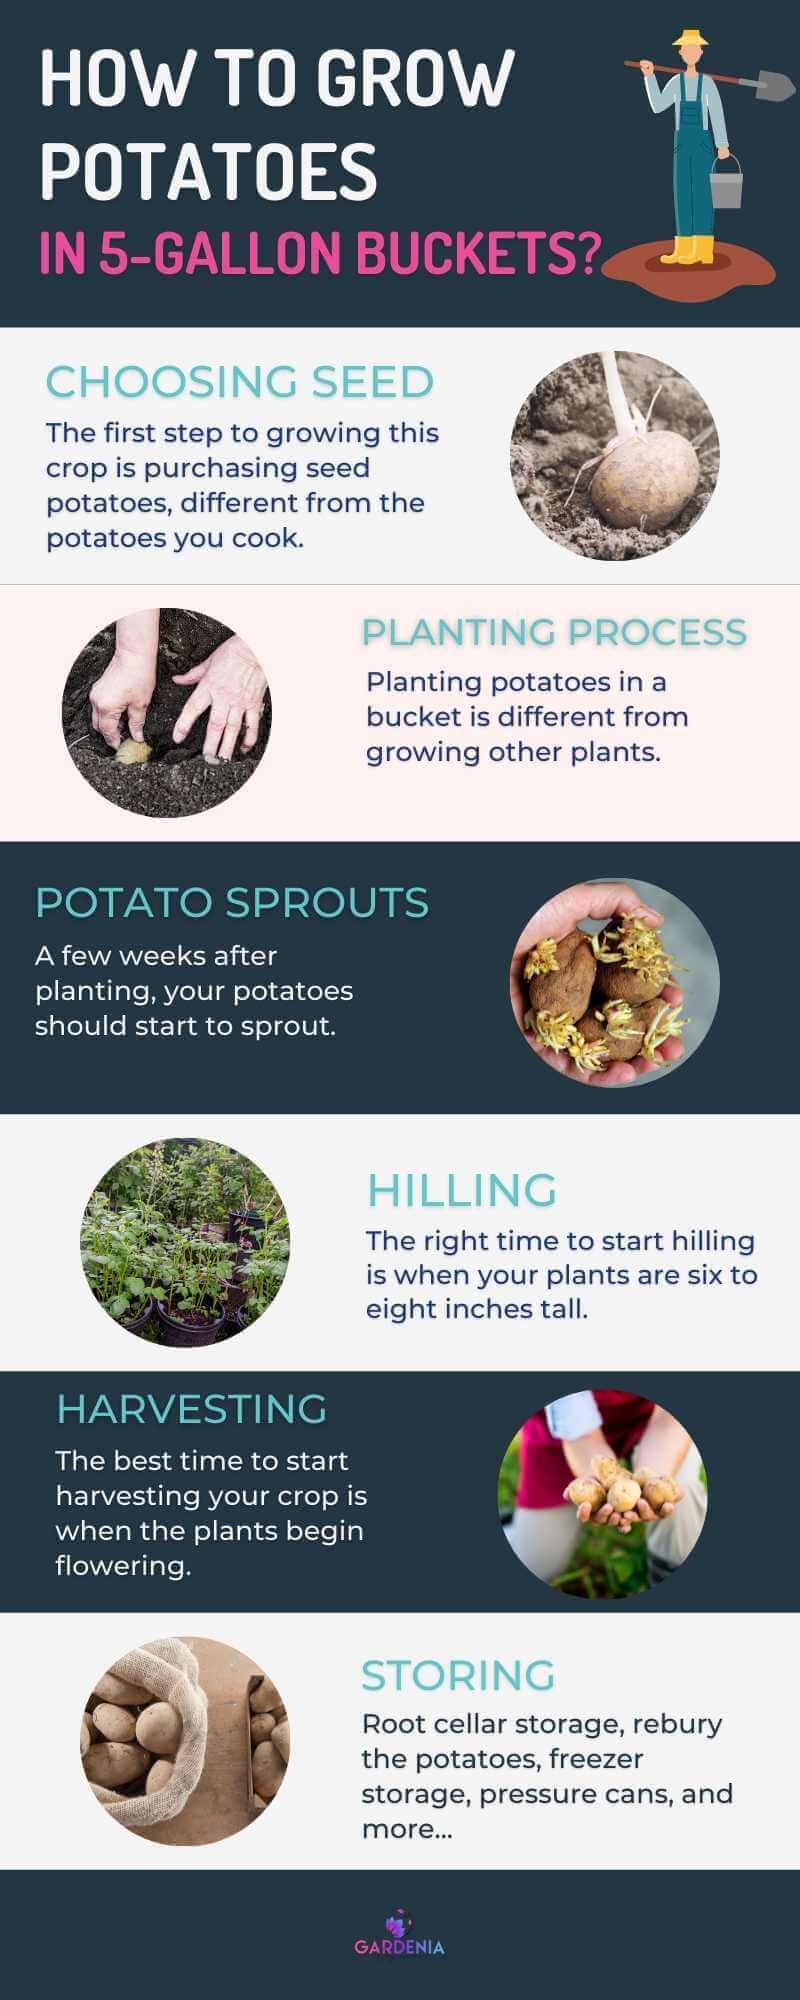 How to Grow Potatoes in 5-Gallon Buckets?